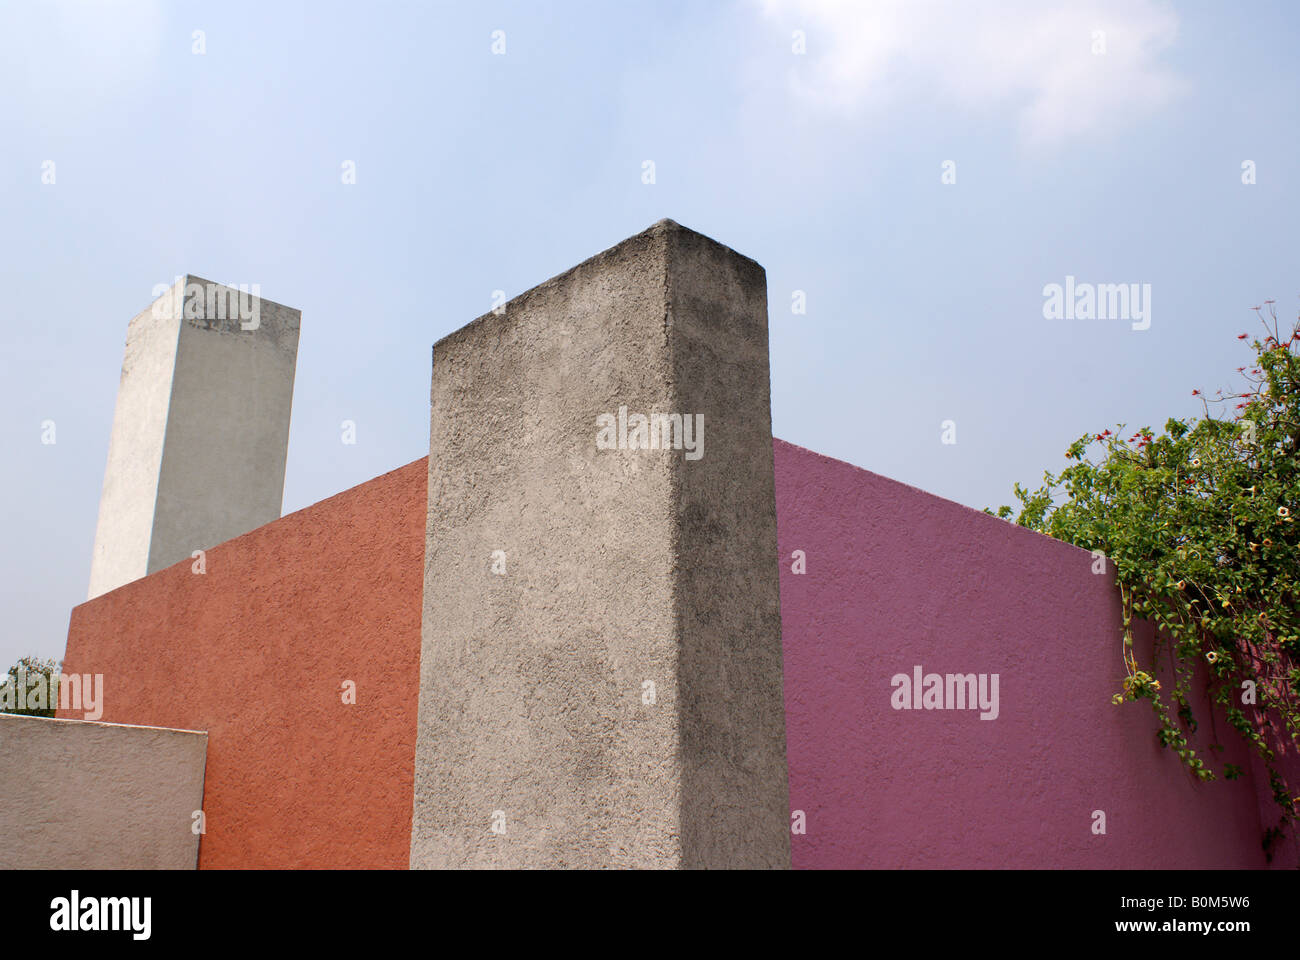 Colorful exterior walls of the Museo Casa Luis Barragán house museum in Mexico City Stock Photo